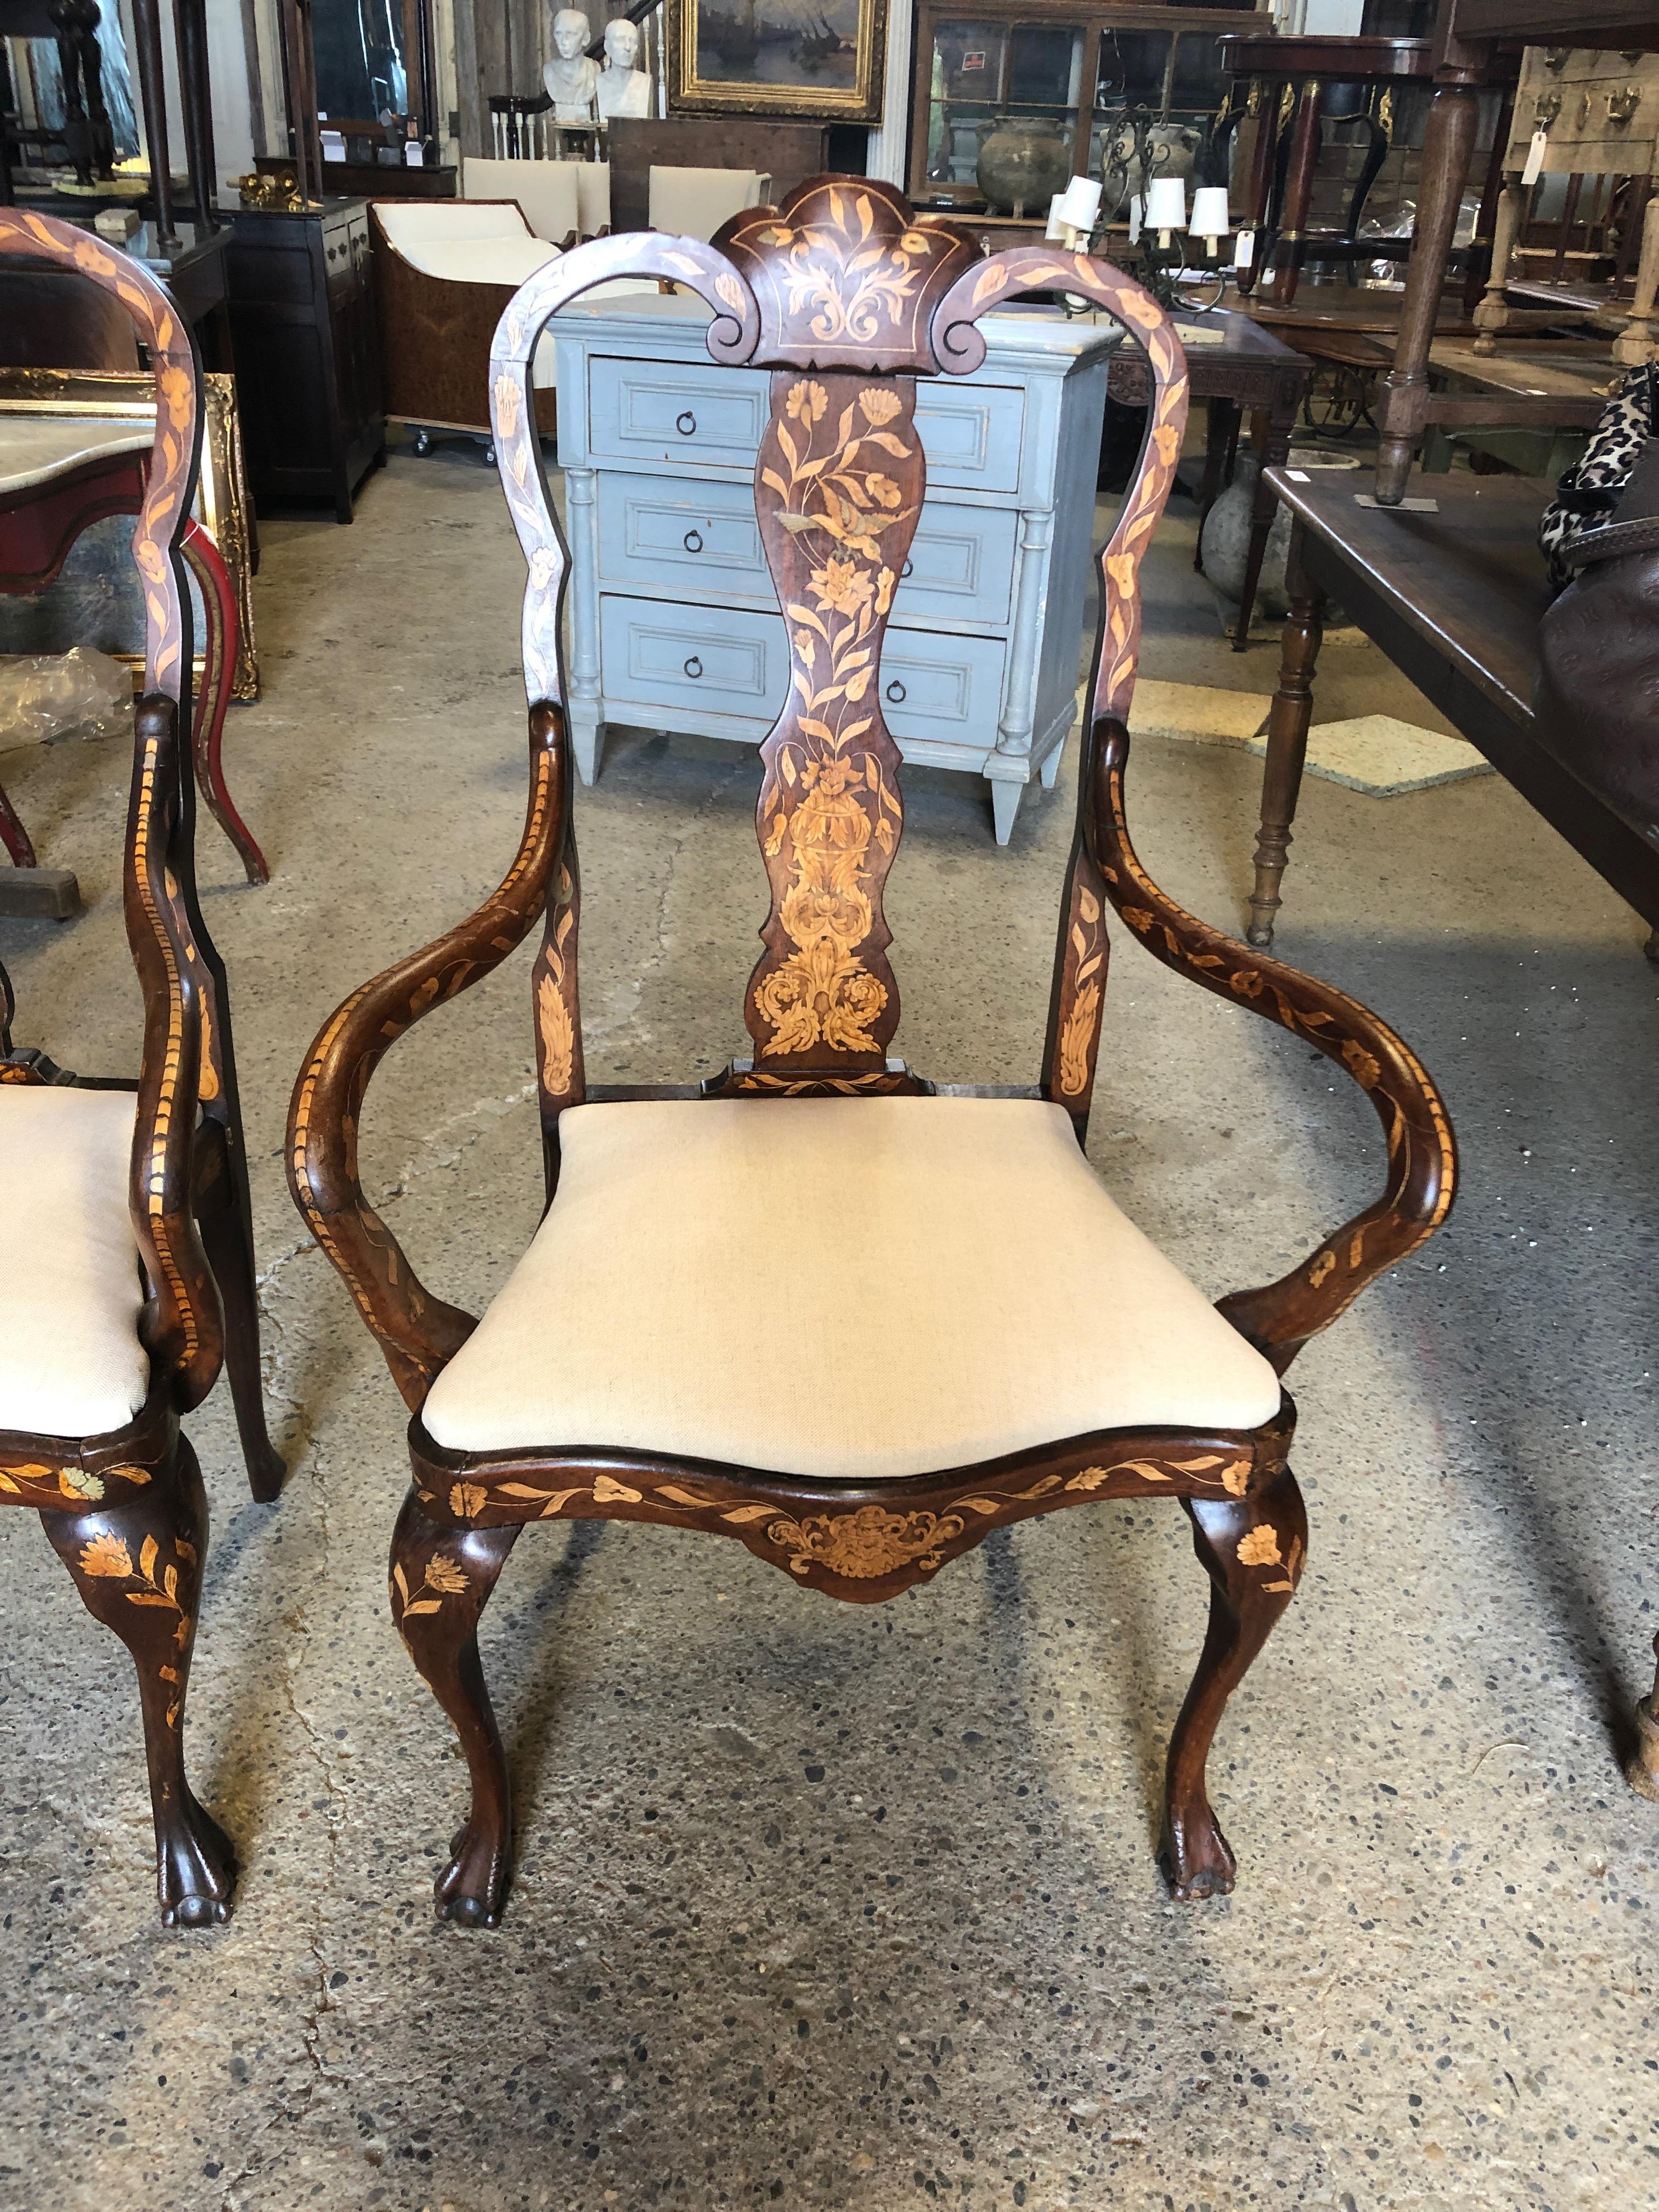 A set of four exquisite Dutch dining chairs consisting of two armchairs and two sidechairs, having the most amazing decorative inlay marquetry. The armchairs are not inlaid on the backs, but the side chairs are decorative front and back. Arm height